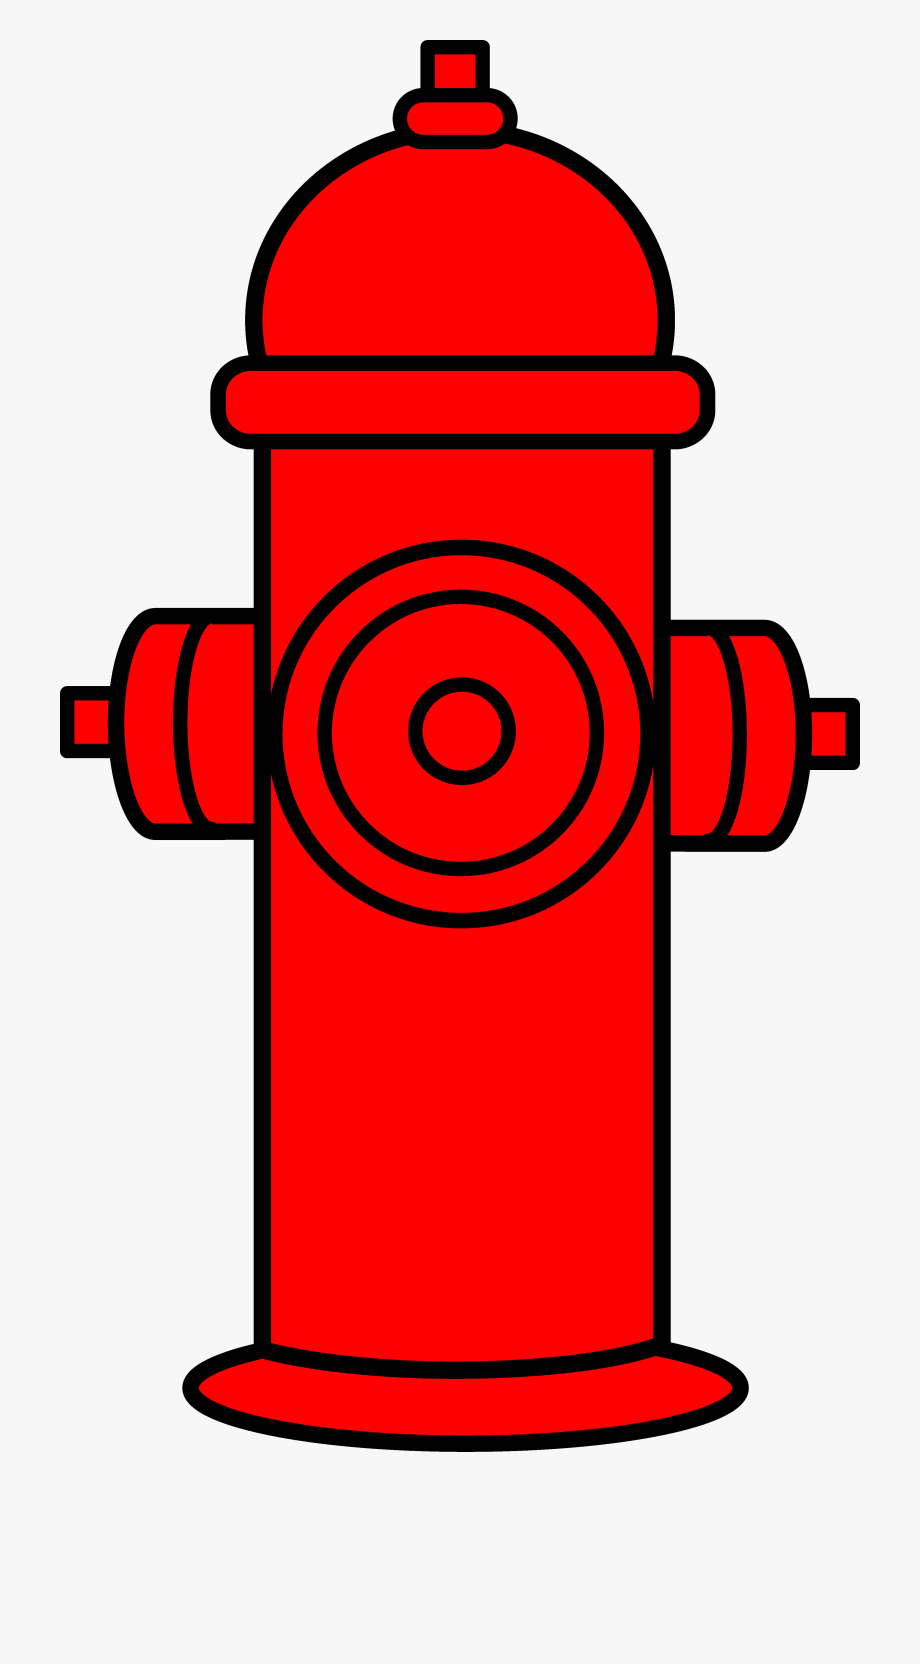 Firefighter clipart hose clipart. Cliparts fire hydrant free